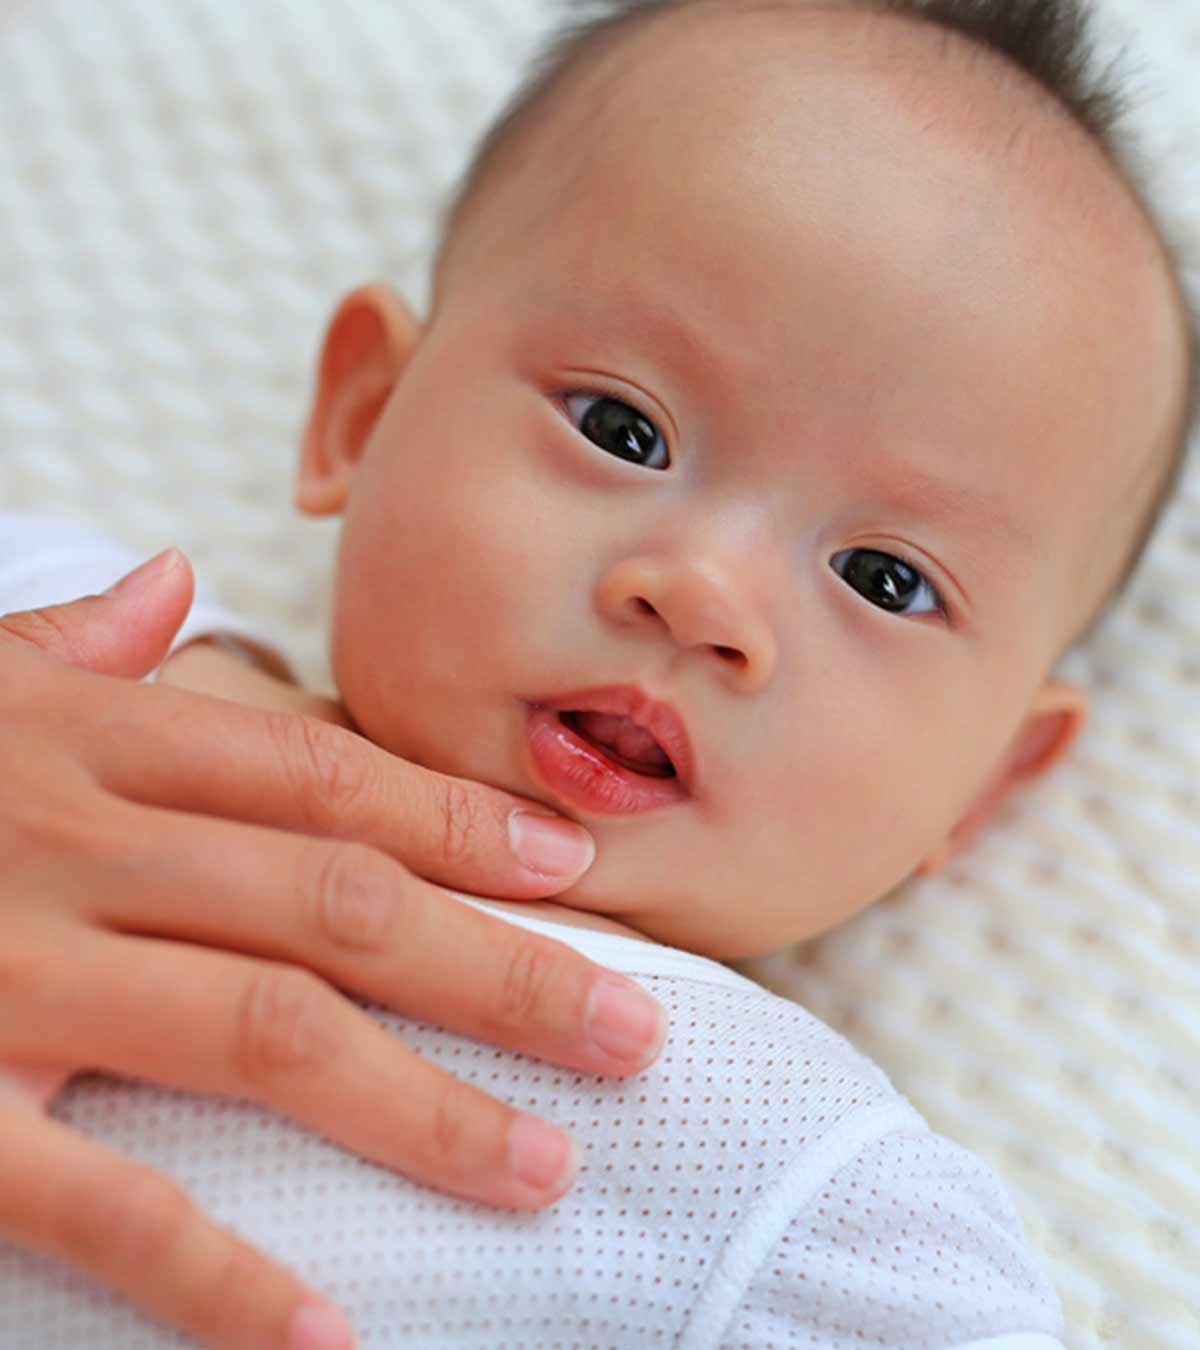 Baby Lip Blisters: Causes, Symptoms, And Treatment